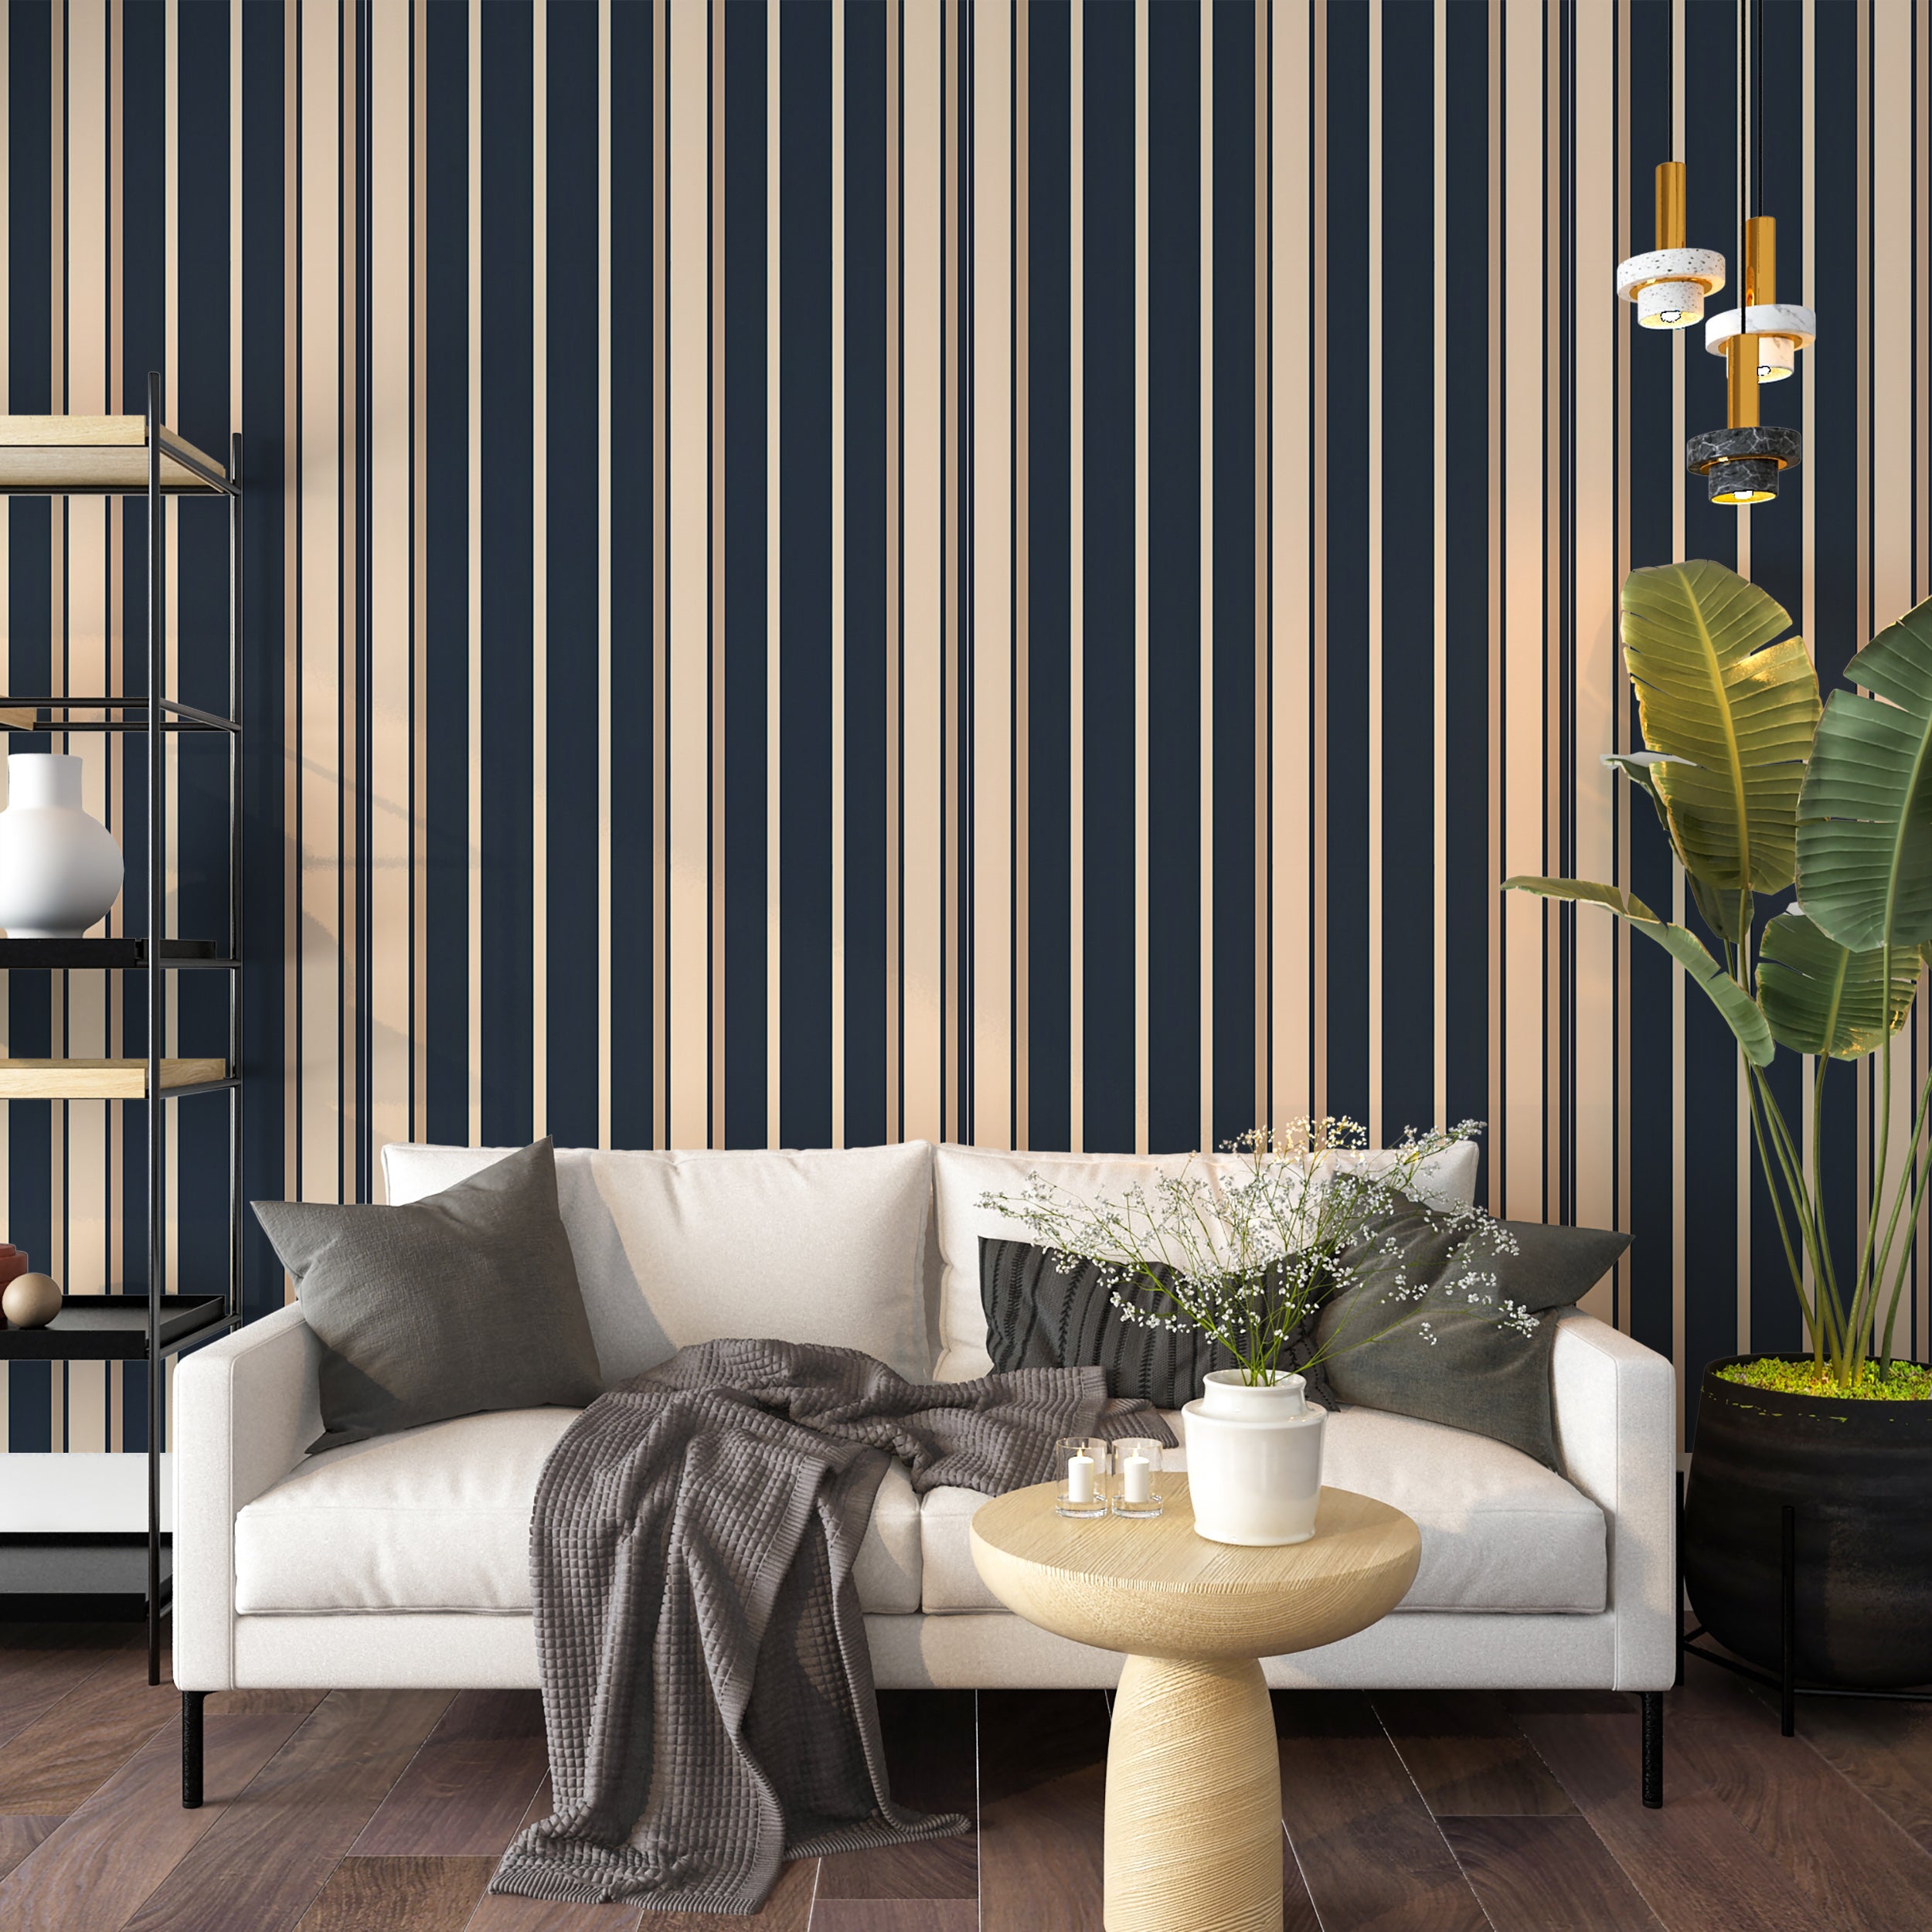 Traditional Striped Wallpaper in Navy Blue and Beige